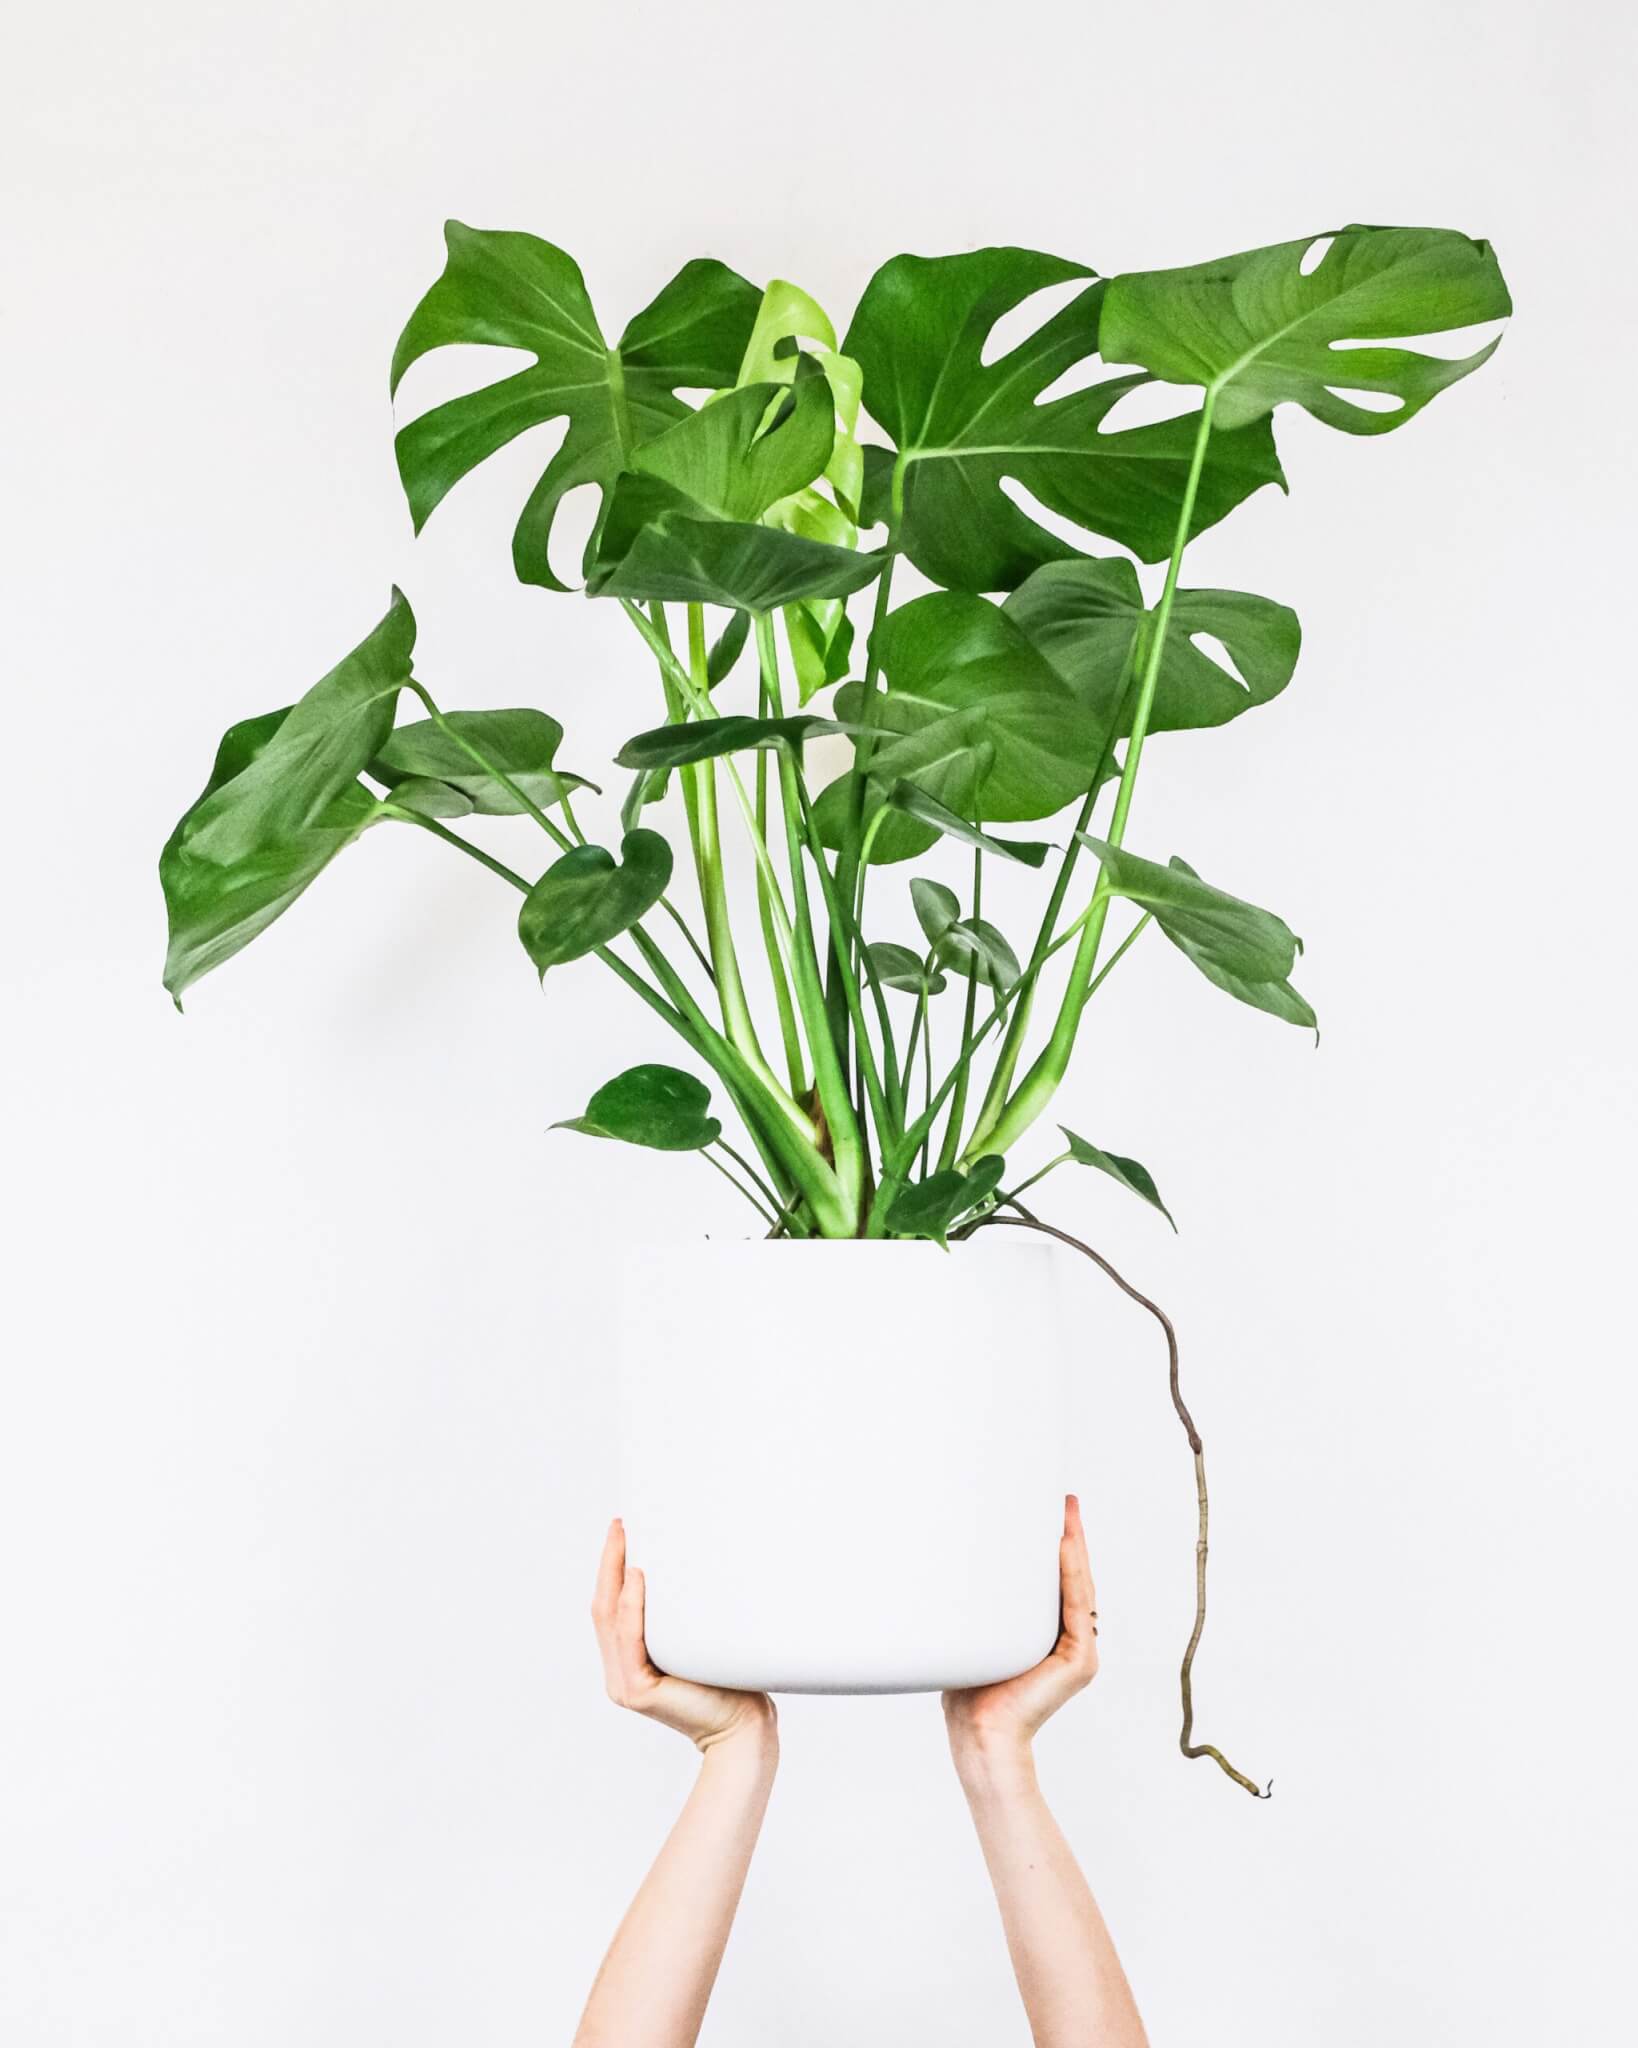 green plant in white pot held in hands 